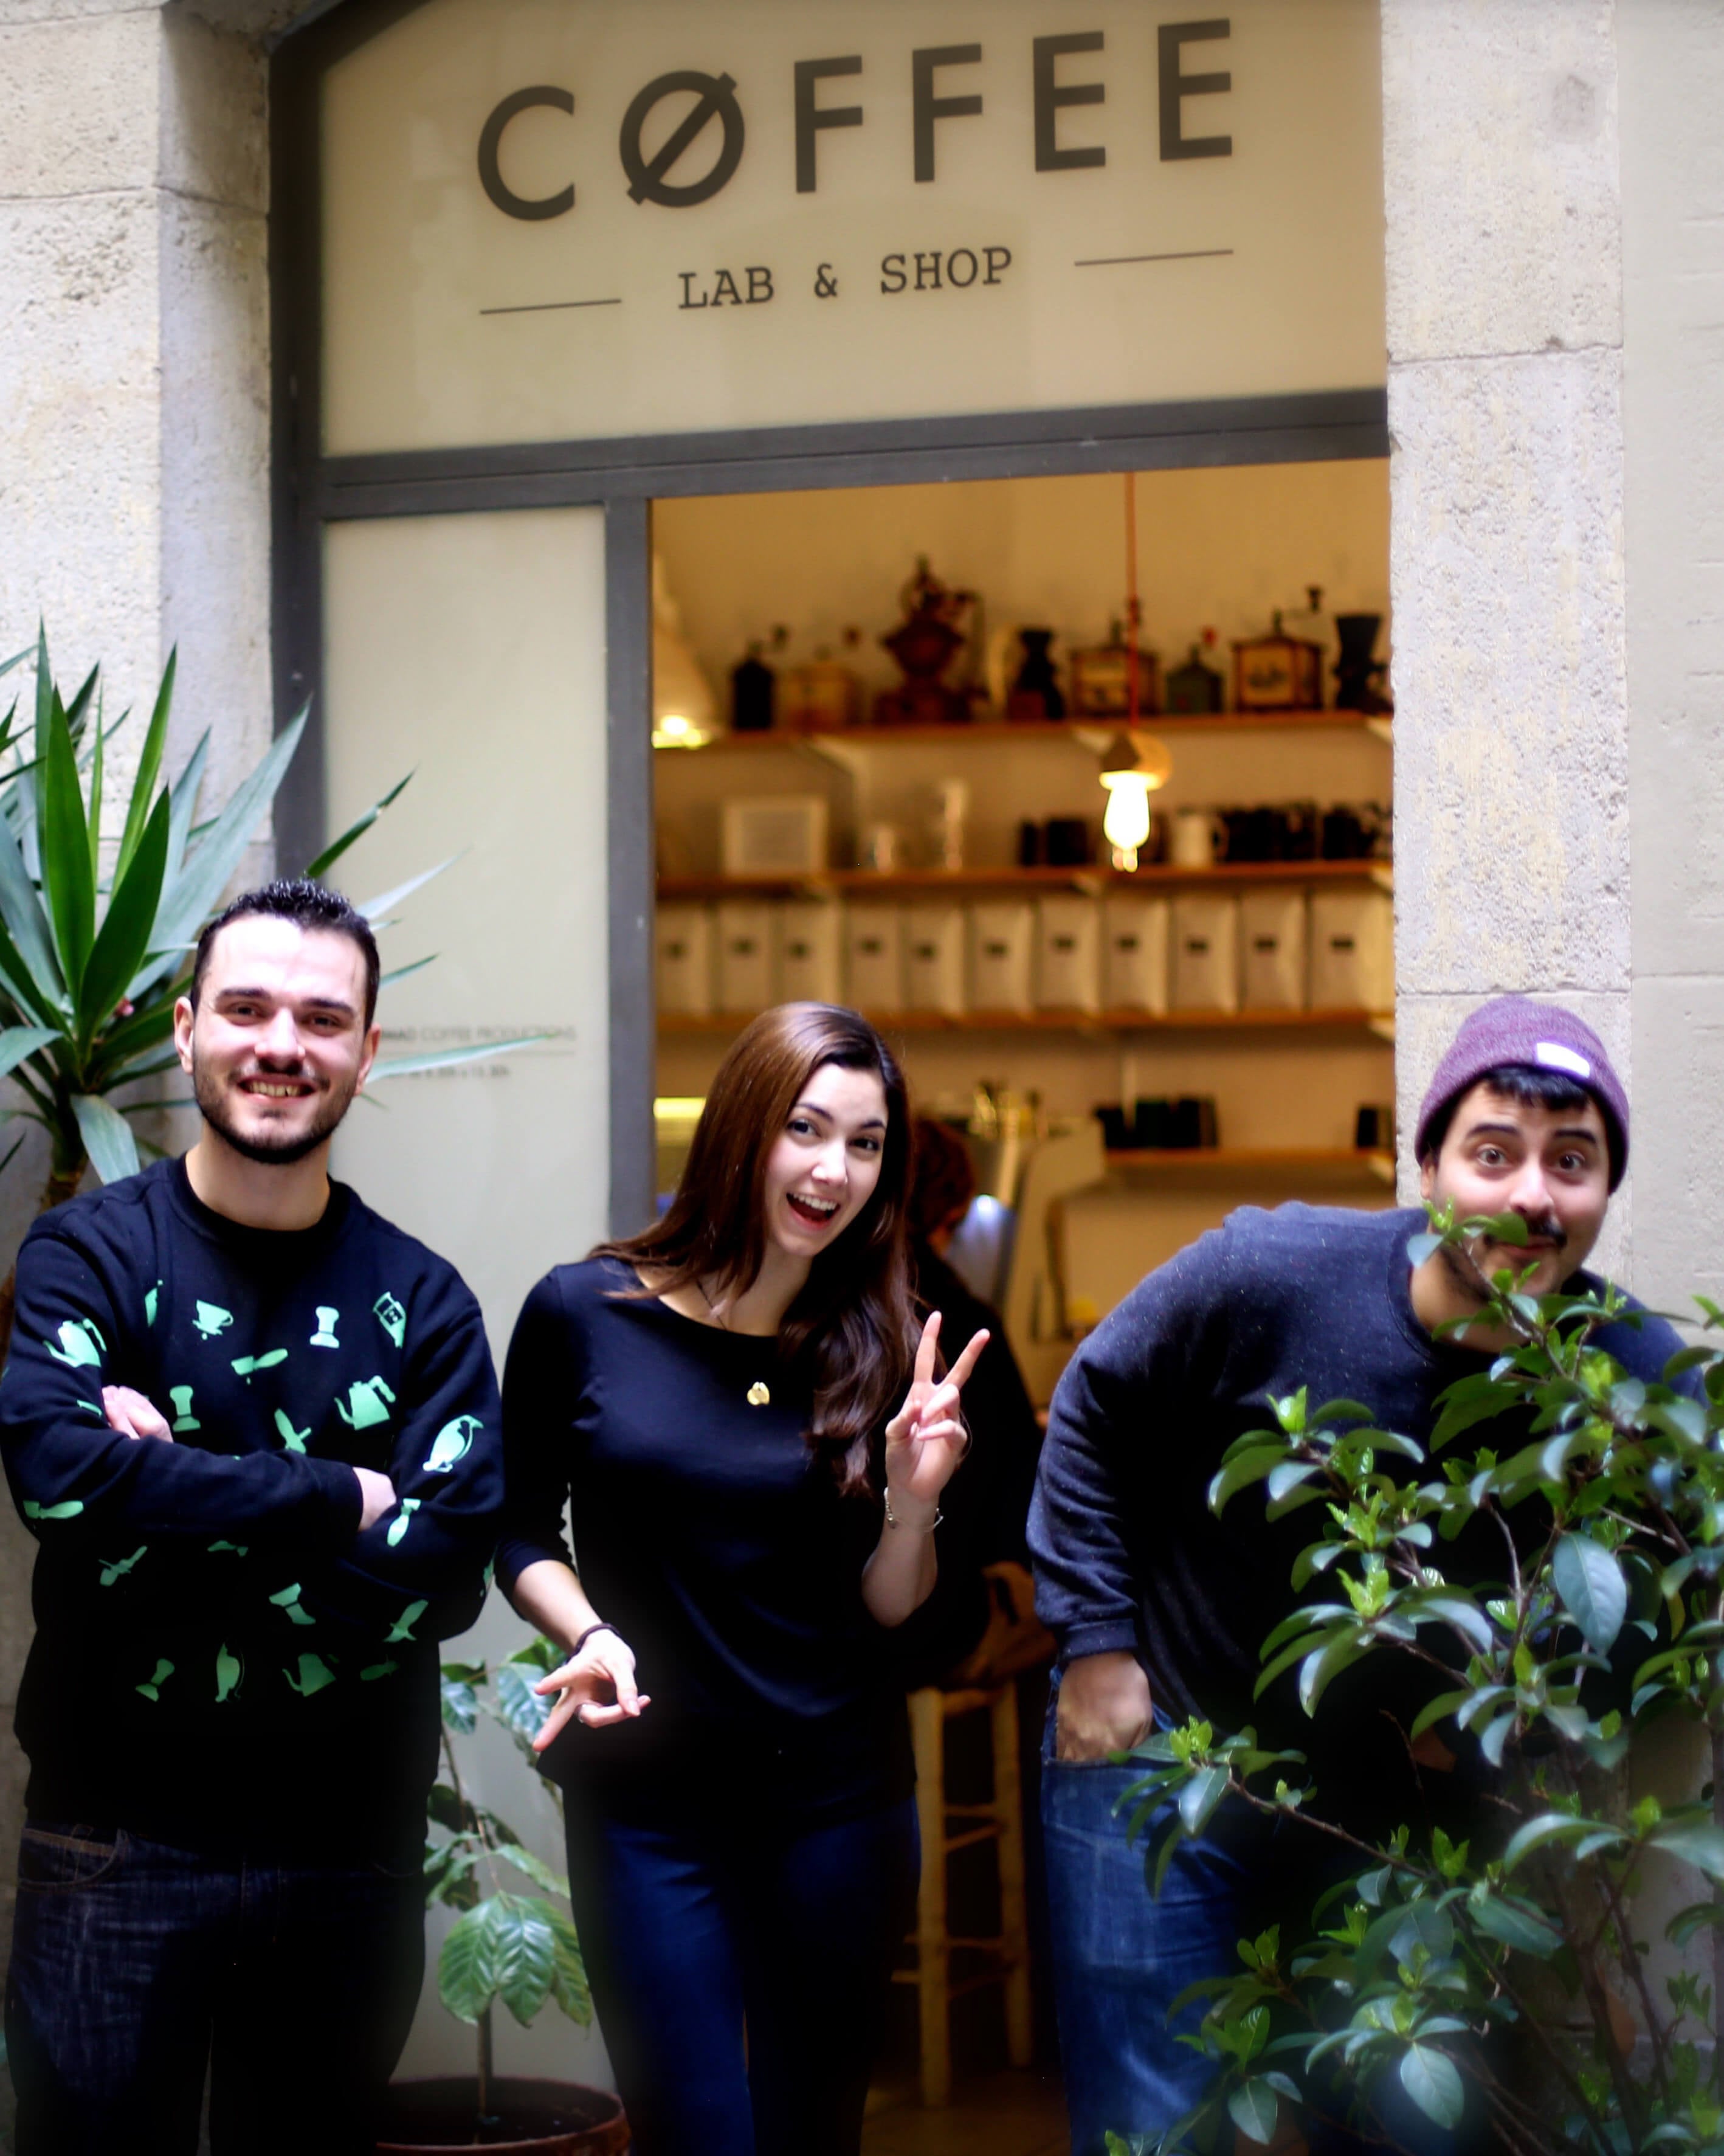 In front of the portal of Nomad Coffee Lab & Shop appear, from left to right: Fran Gonzalez, Monica Mc Coy and Jordi Mestre laughing next to some plants.